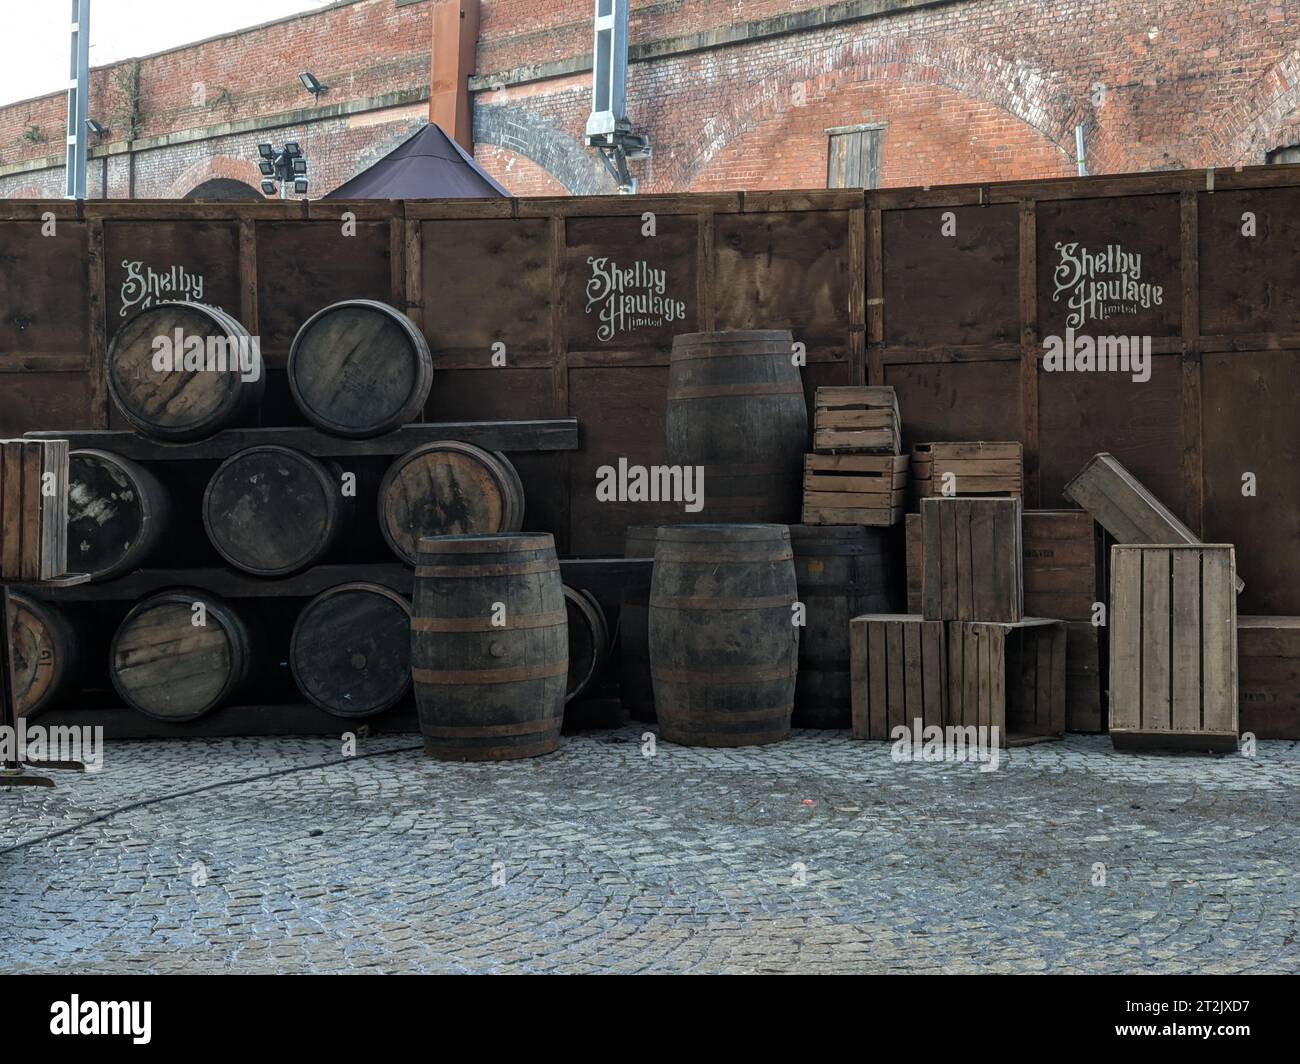 Film set for Peaky Blinders period drama at Castlefield heritage site with barrels and sign for Shelby Haulage Limited. Manchester UK. Stock Photo